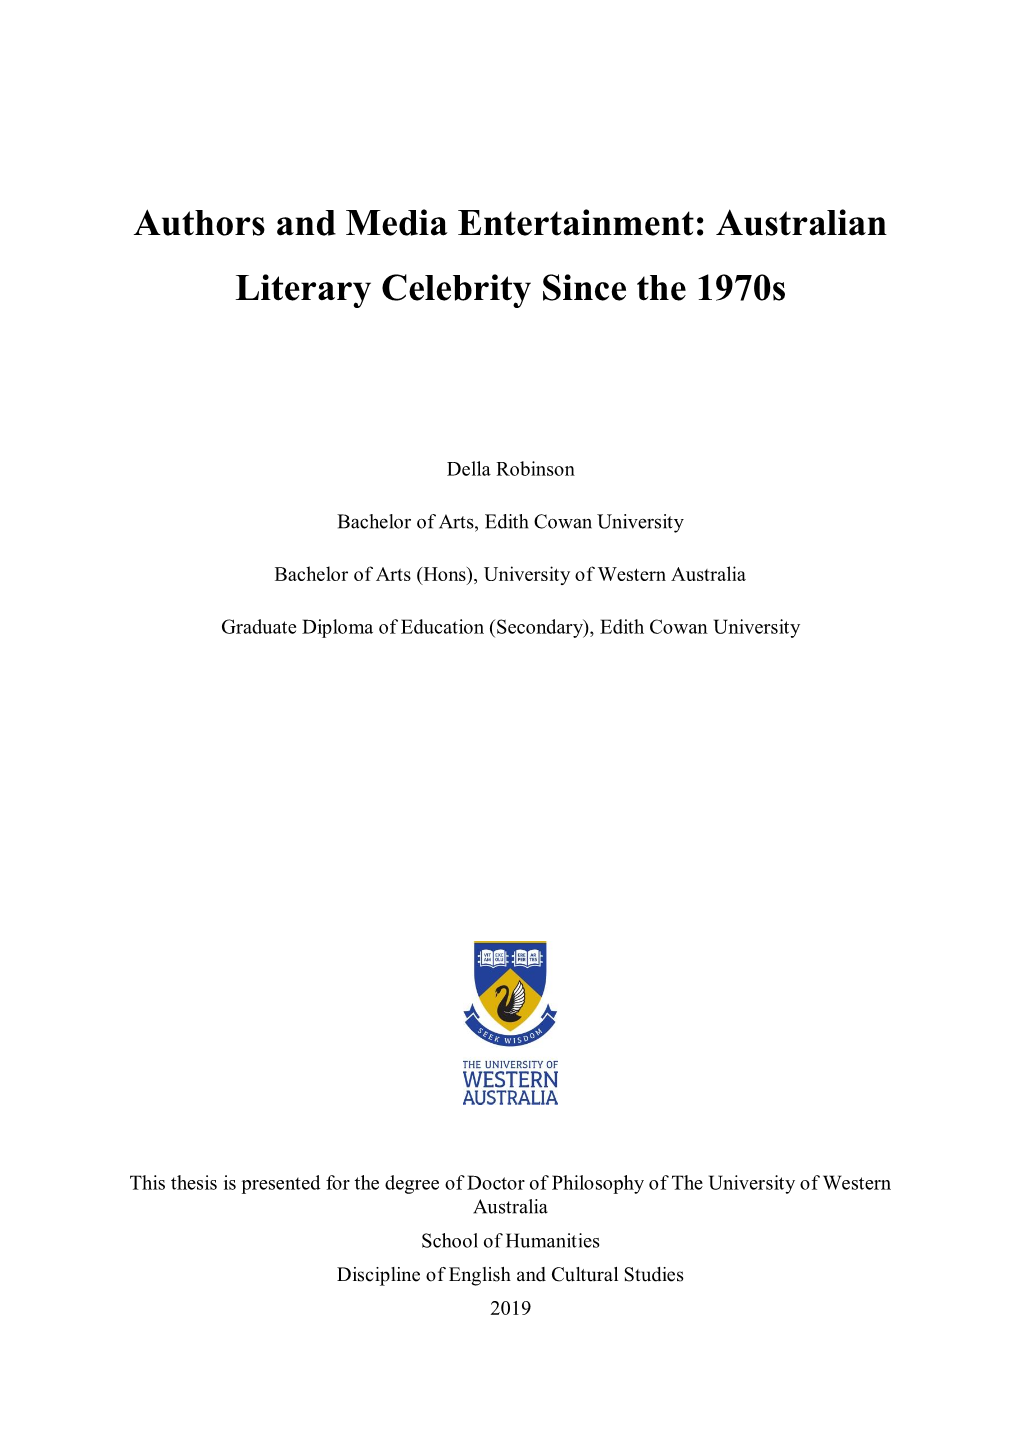 Authors and Media Entertainment: Australian Literary Celebrity Since the 1970S